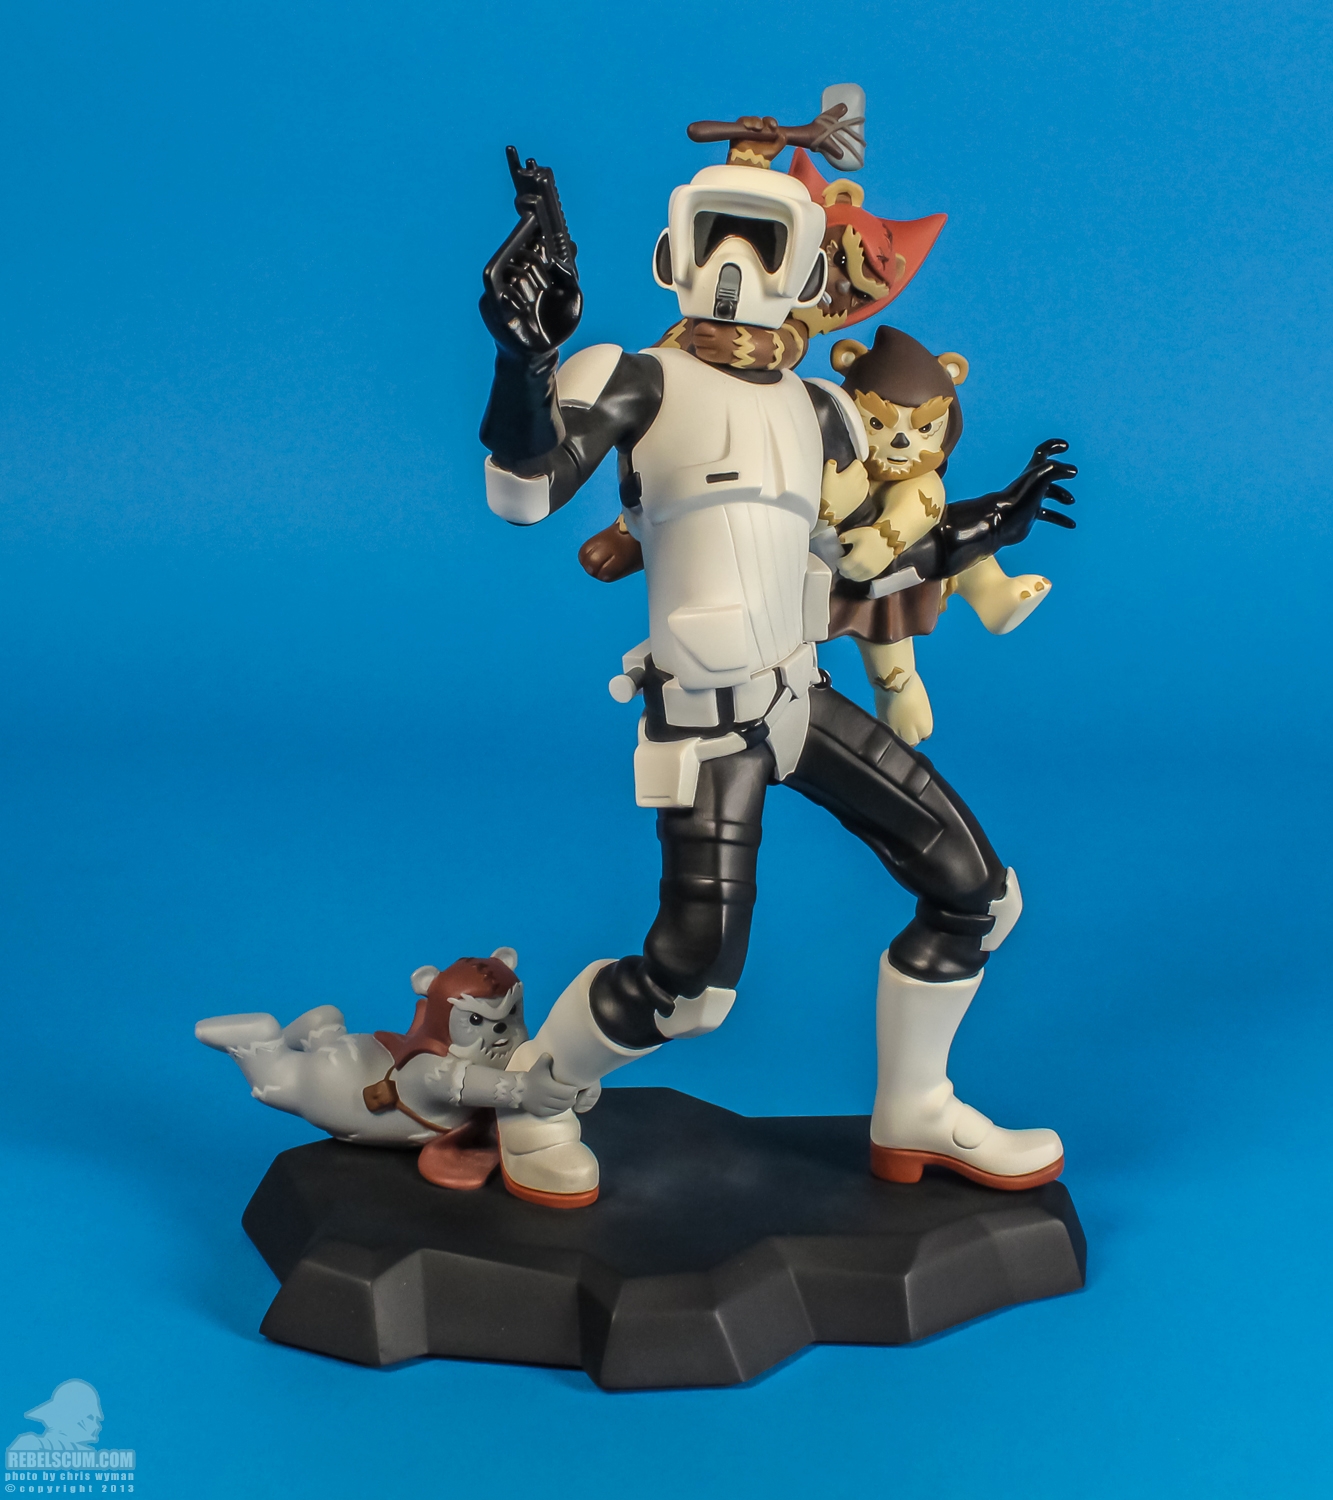 Scout_Trooper_Ewok Attack_Animated_Maquette_Gentle_Giant_Ltd-01.jpg